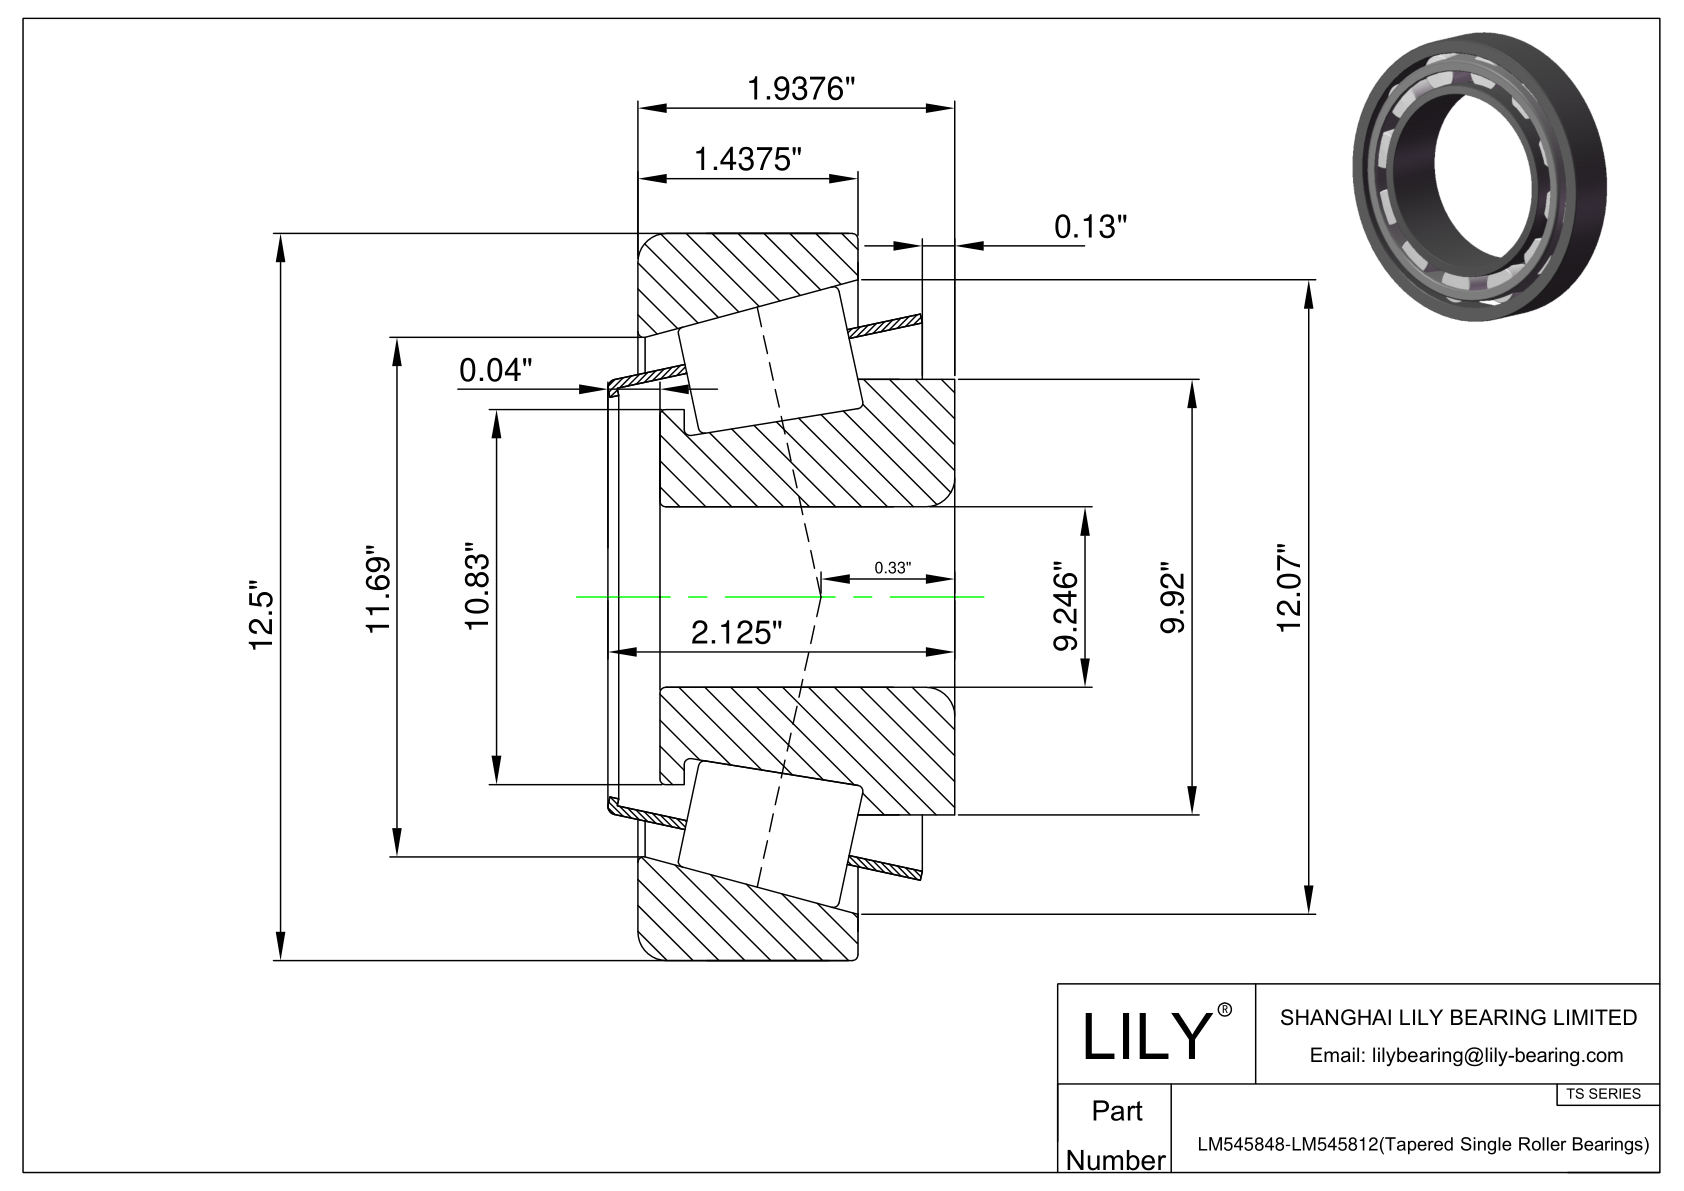 LM545848-LM545812 TS (Tapered Single Roller Bearings) (Imperial) cad drawing